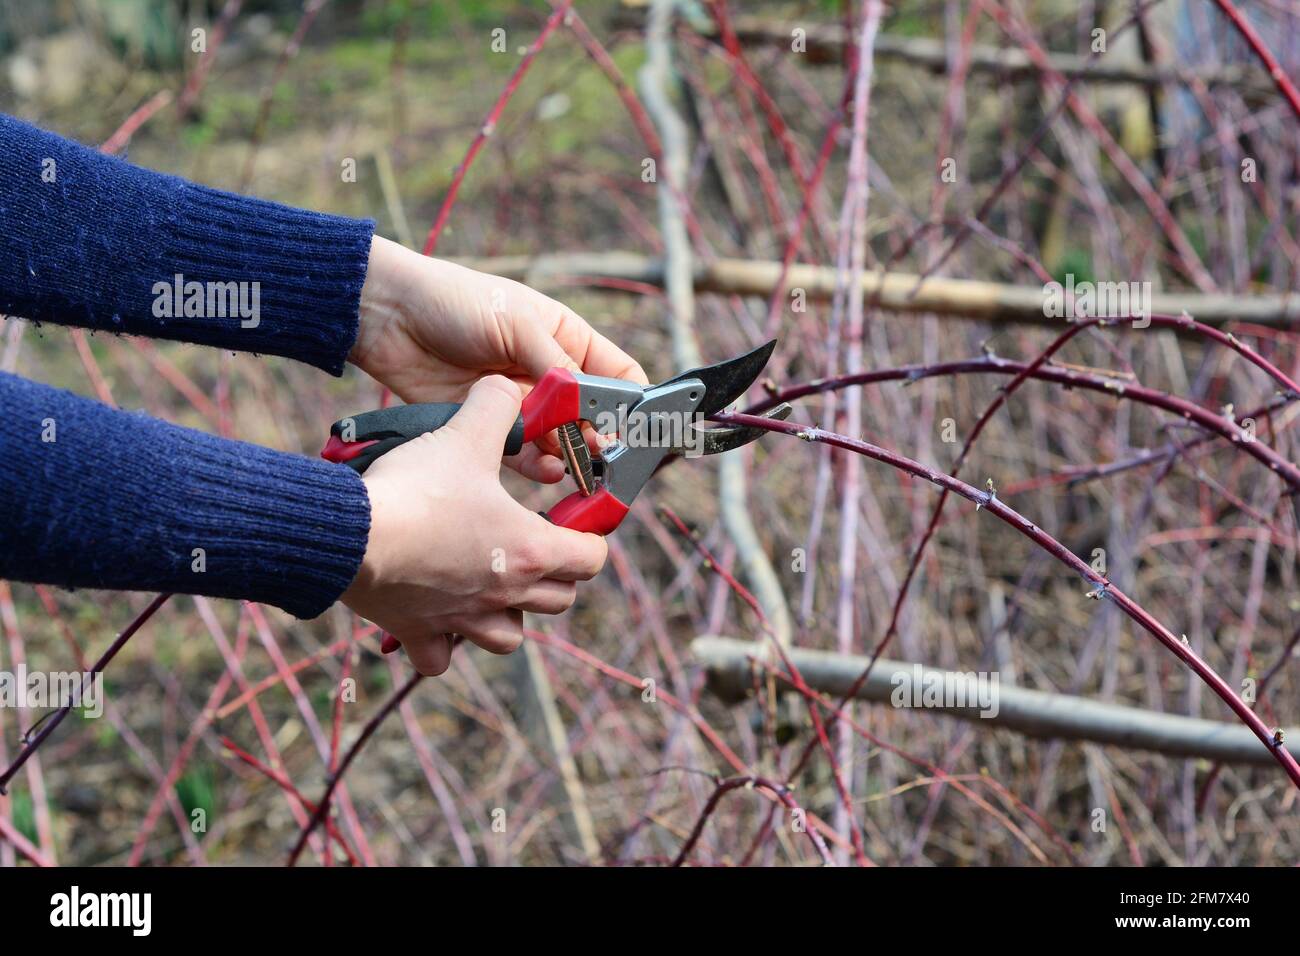 Pruning cumberland black raspberry, rubus occidentalis, blackberry plants by cutting dead and damaged canes with pruning shears in early spring. Black Stock Photo